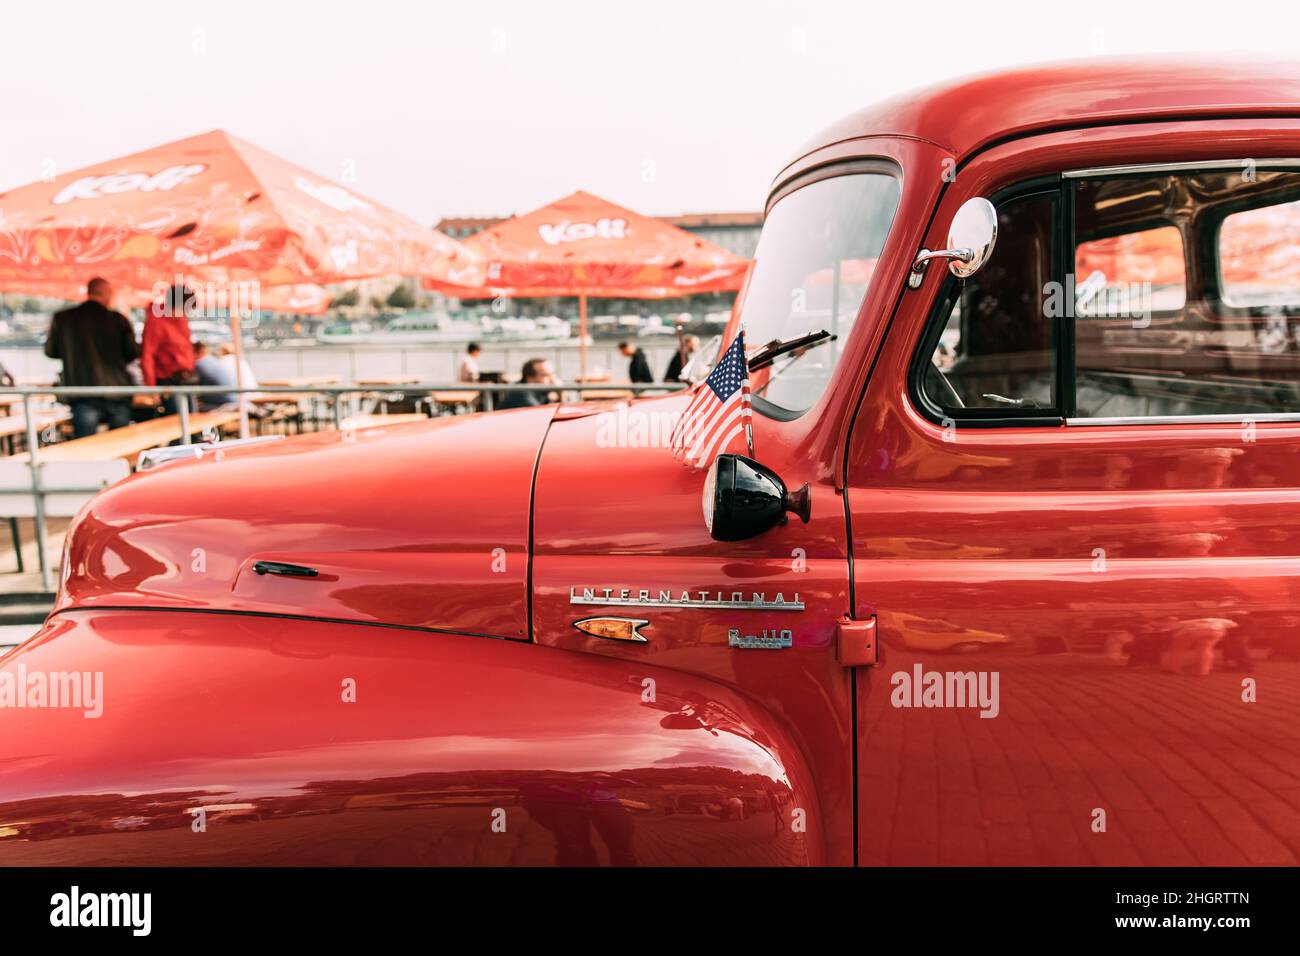 Close Side View Of Red International Harvester R-series Truck With Small American Flag Parked In Street. Stock Photo